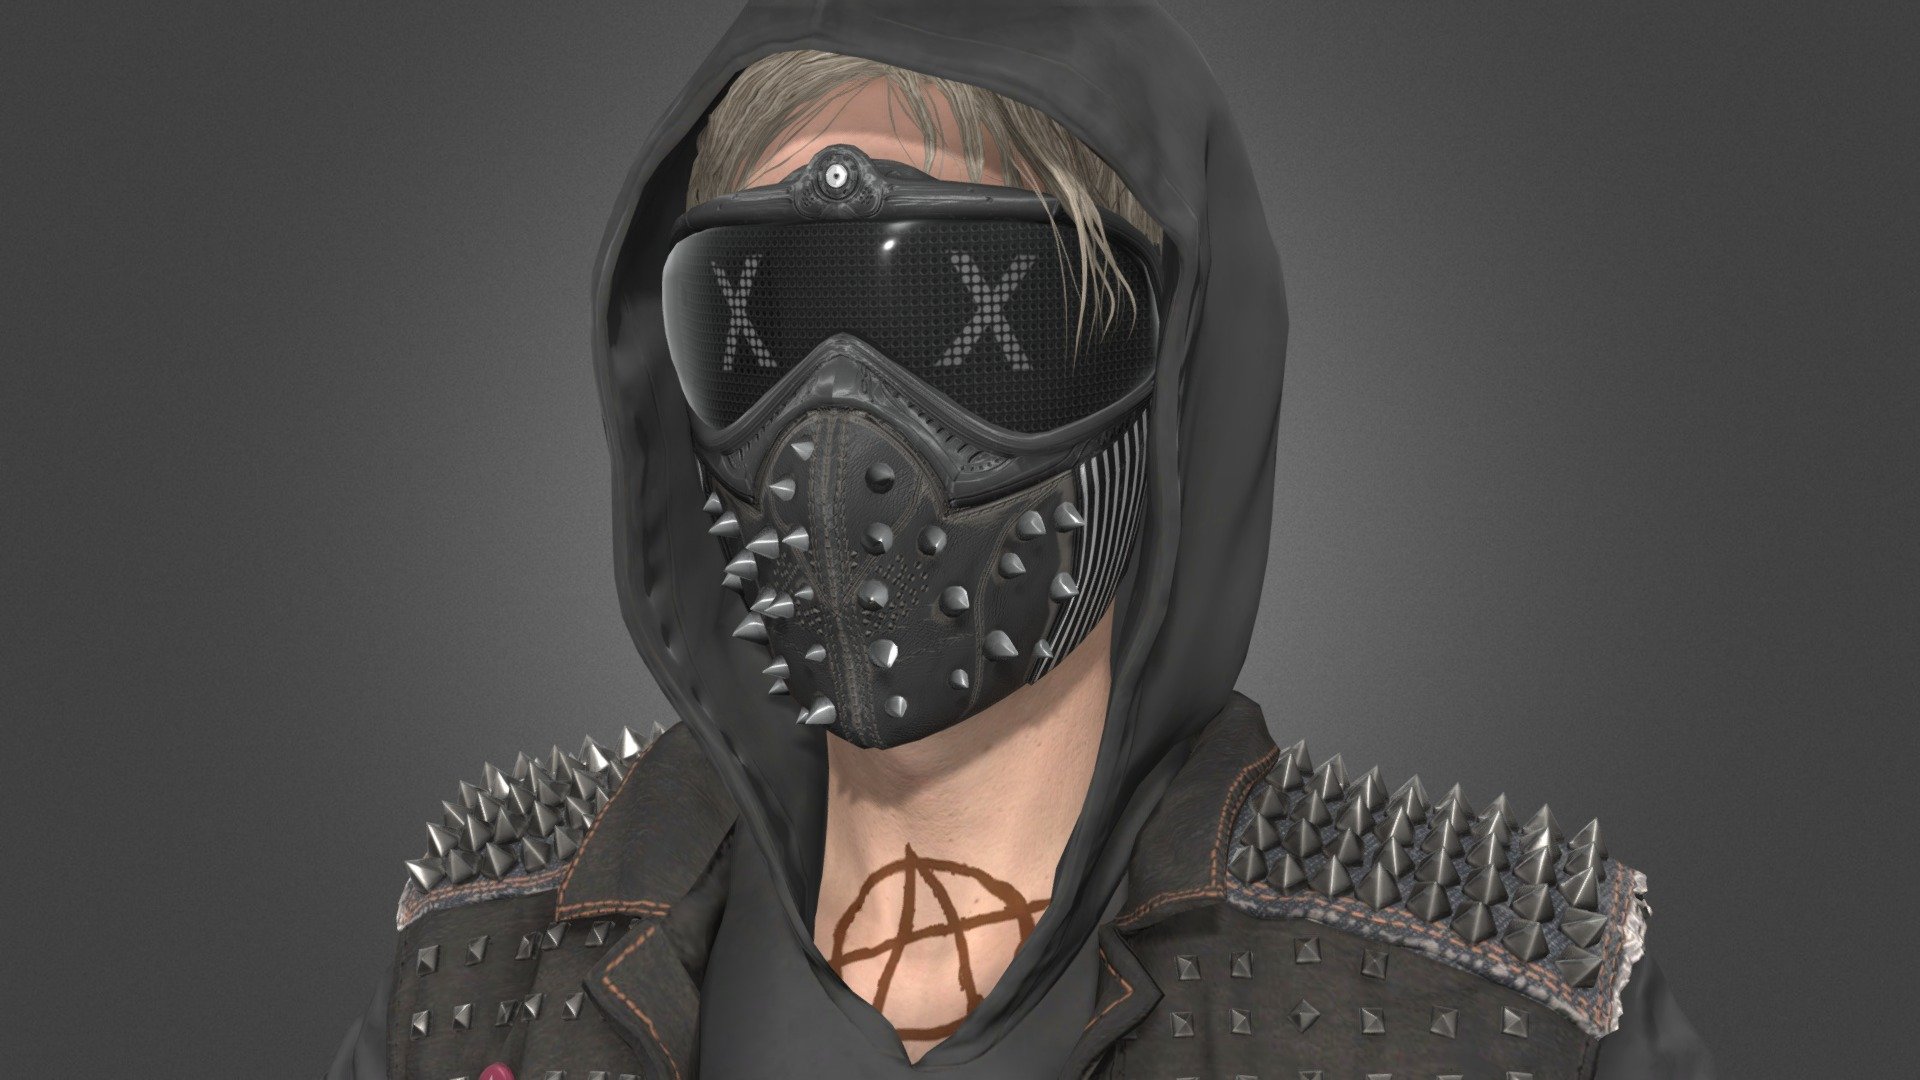 Download here: Deviantart

Model from the game Watch Dogs 2, developed by Ubisoft. I'm a little too lazy to completely customize everything, materials, etc., so it doesn't look great here. It looks much better on the Deviantart preview, and it gives a more accurate understanding of what the model looks like 3d model